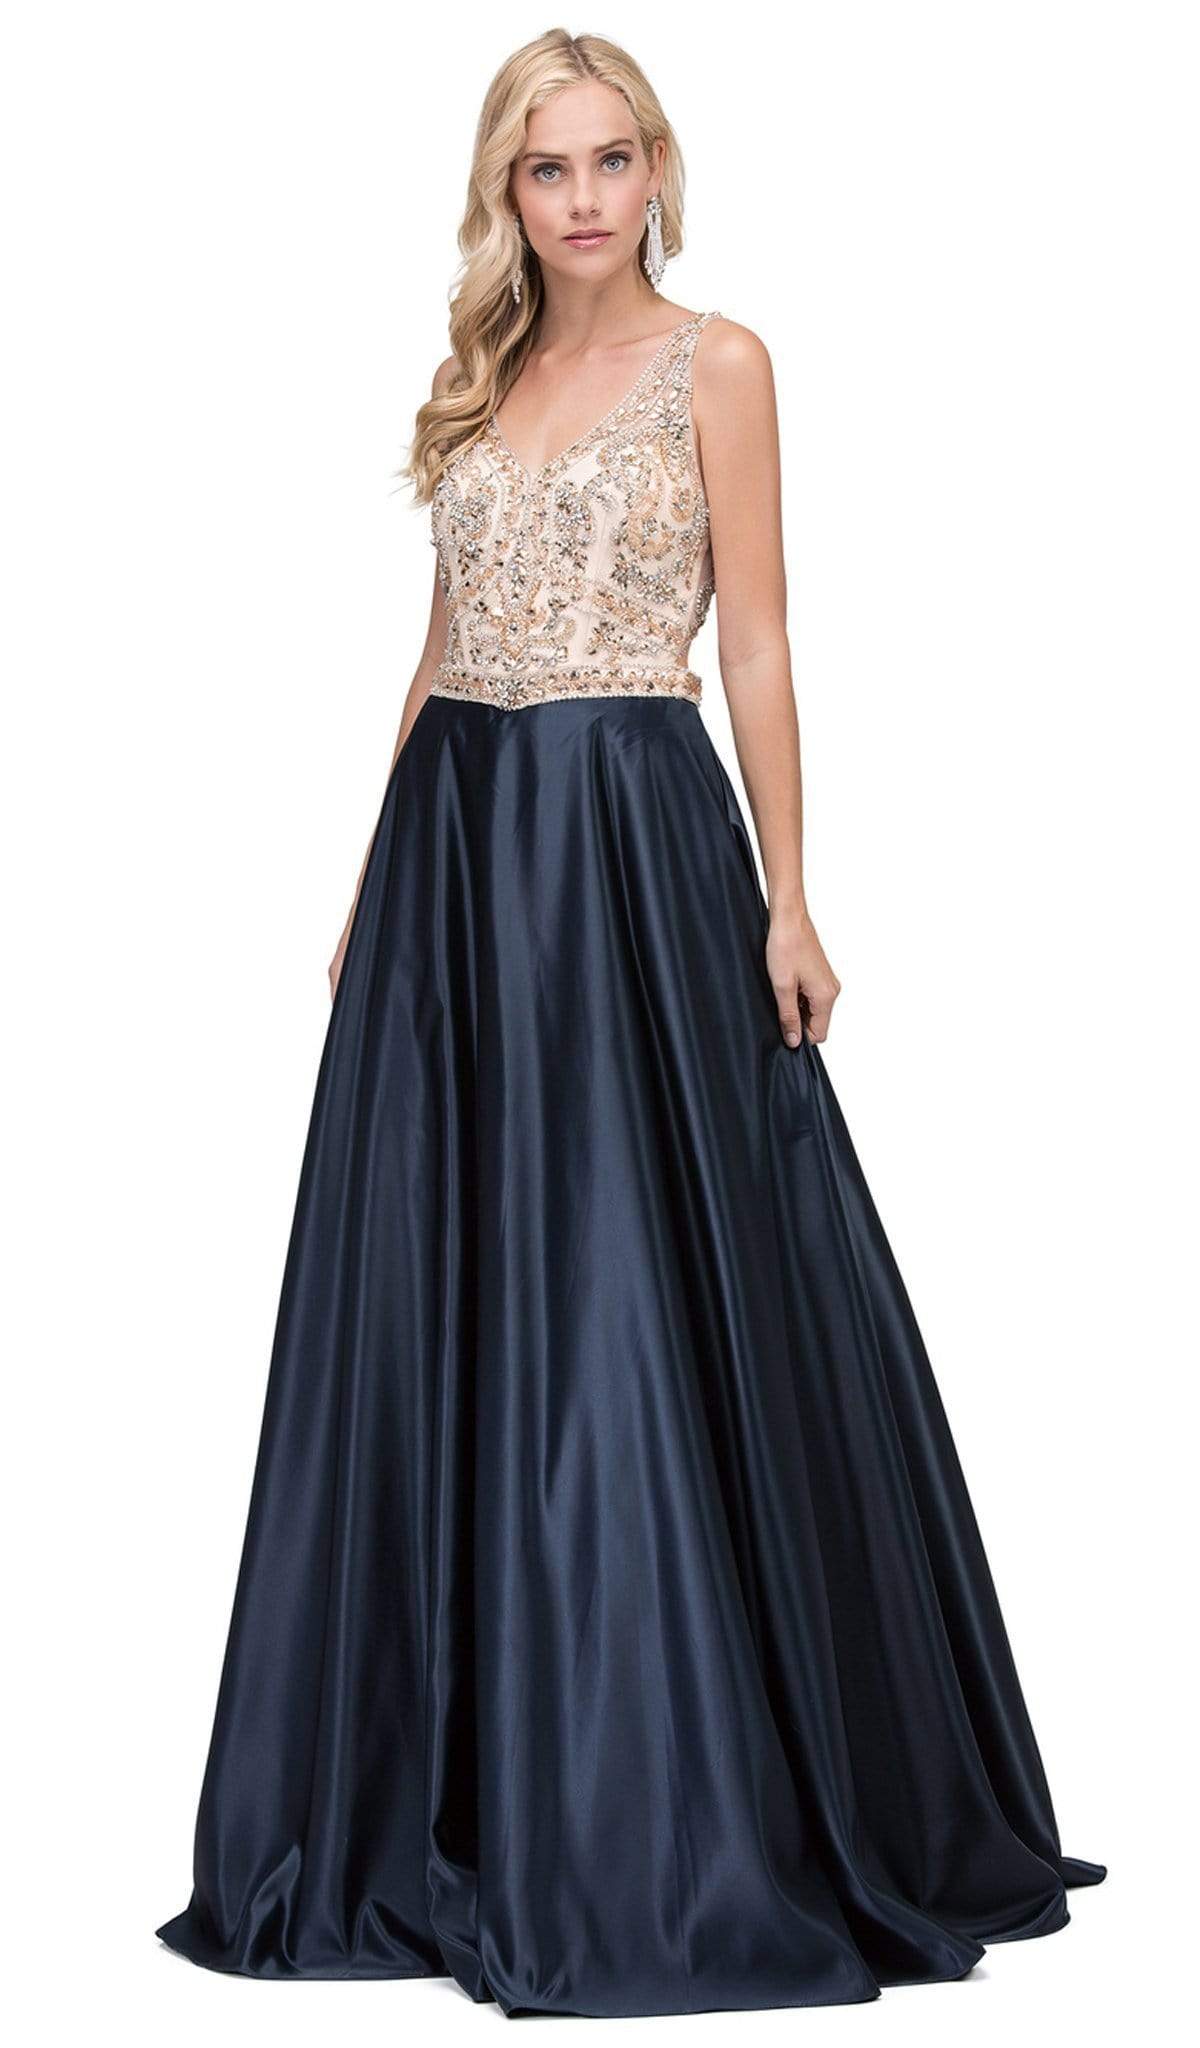 Dancing Queen - 2416 Jeweled V-neck A-line Prom Dress Special Occasion Dress XS / Navy